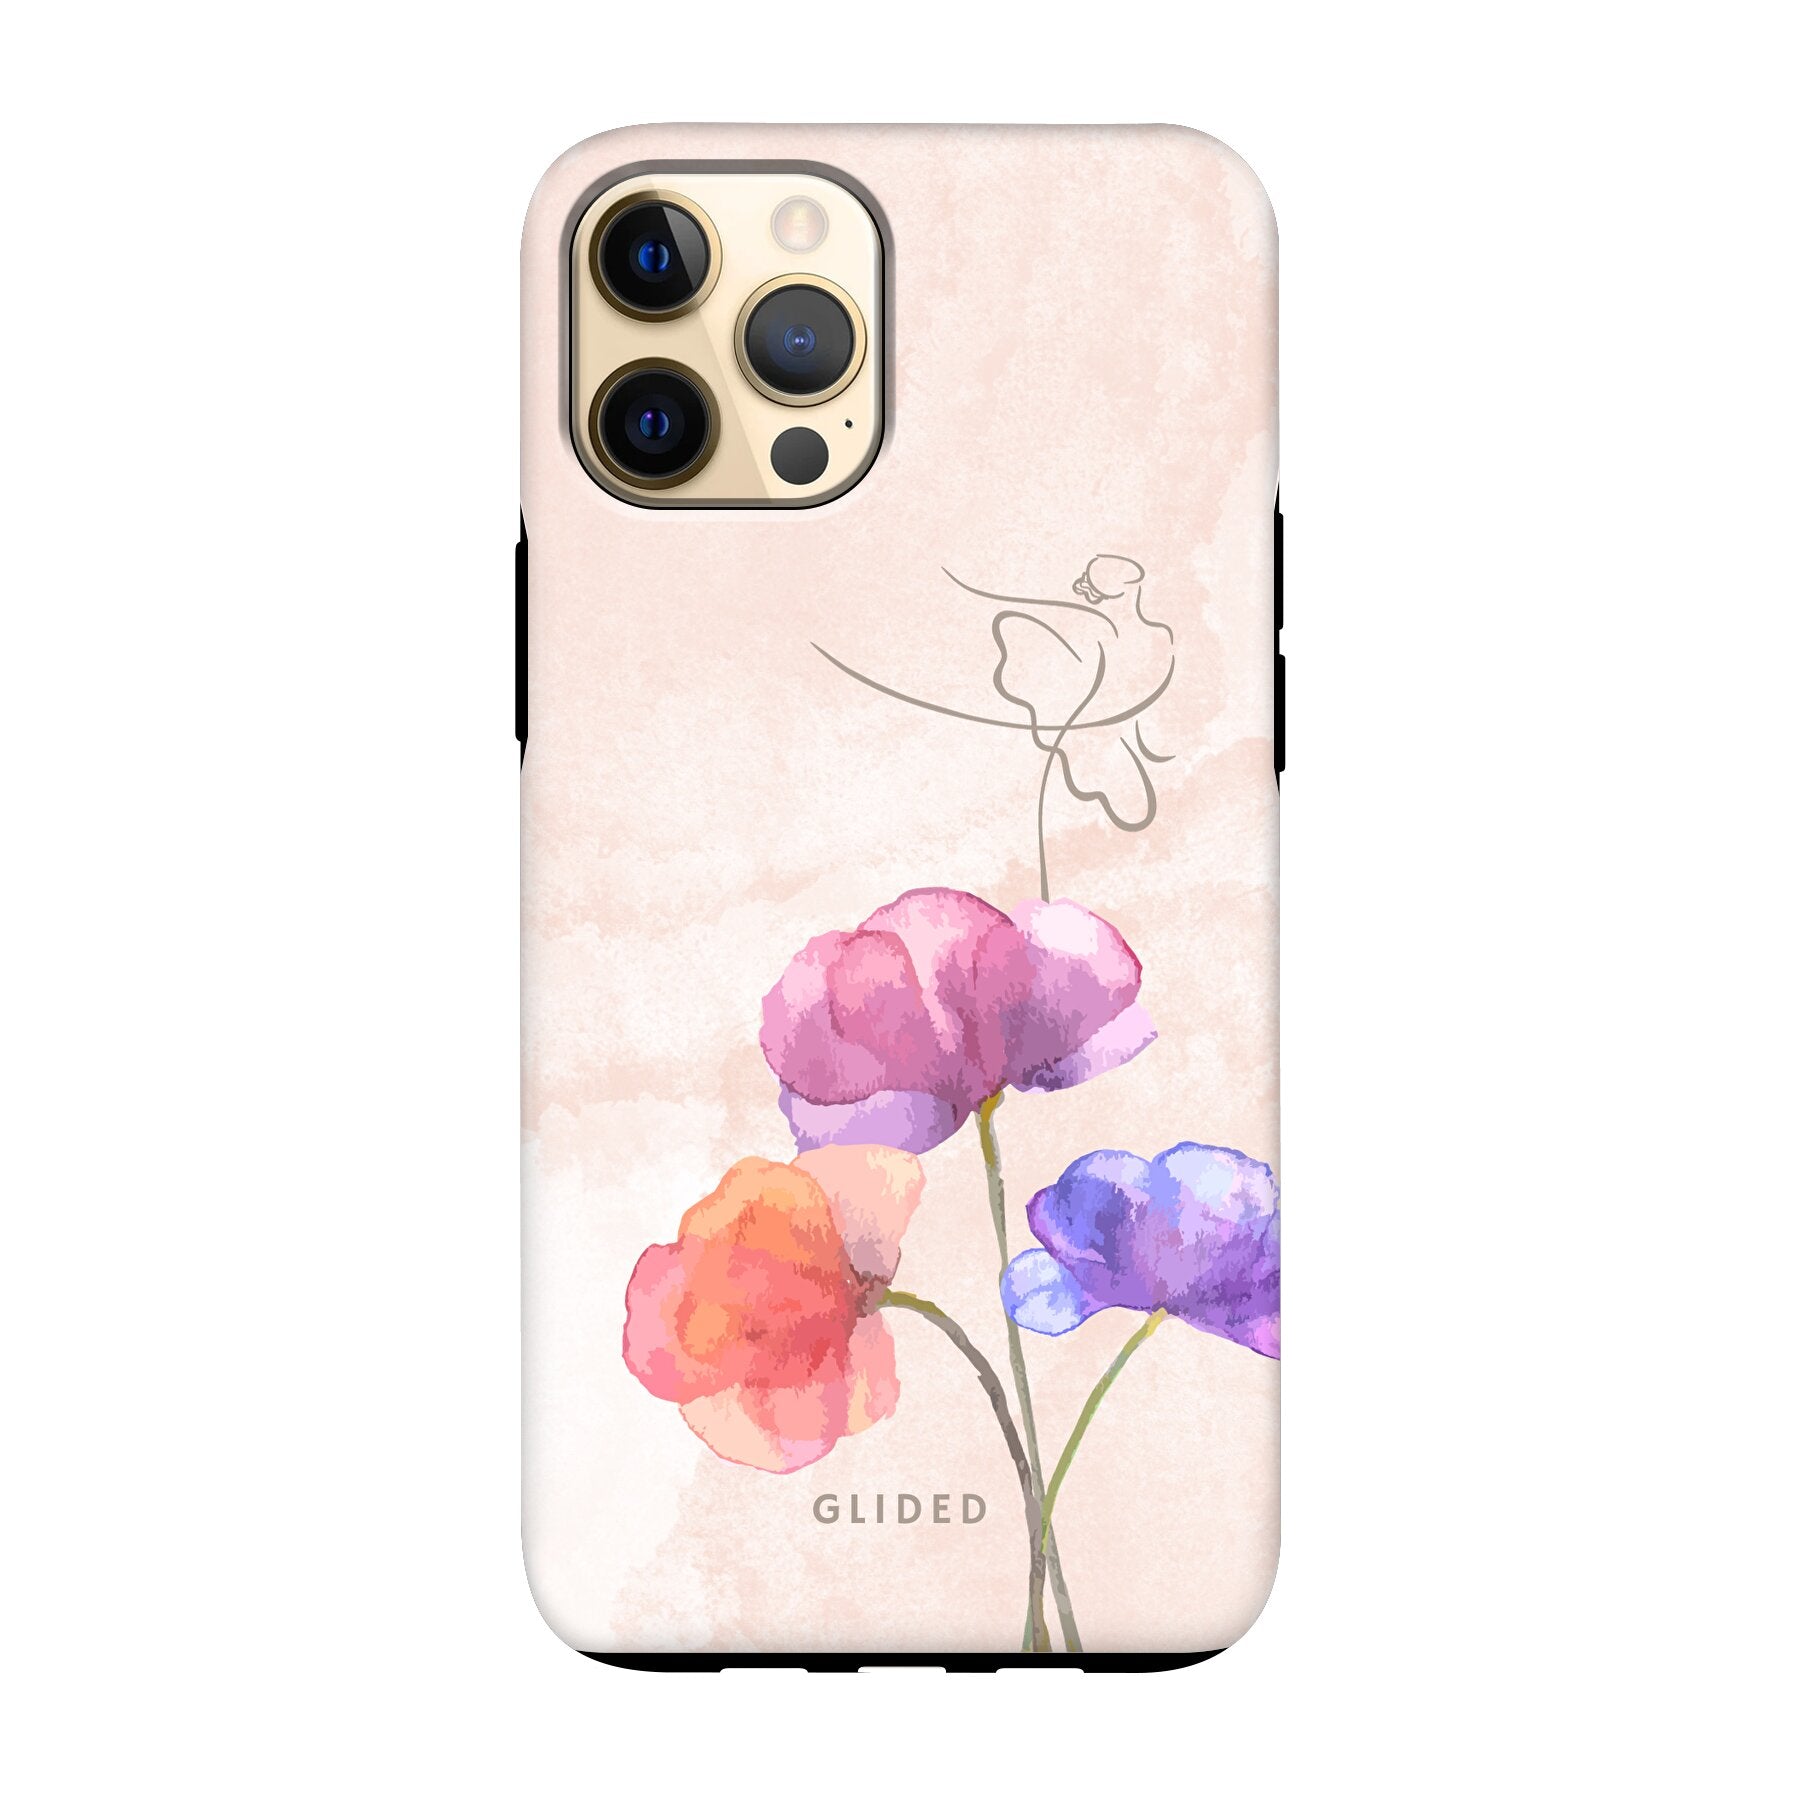 Blossom - iPhone 12 Pro Max Handyhülle Tough case